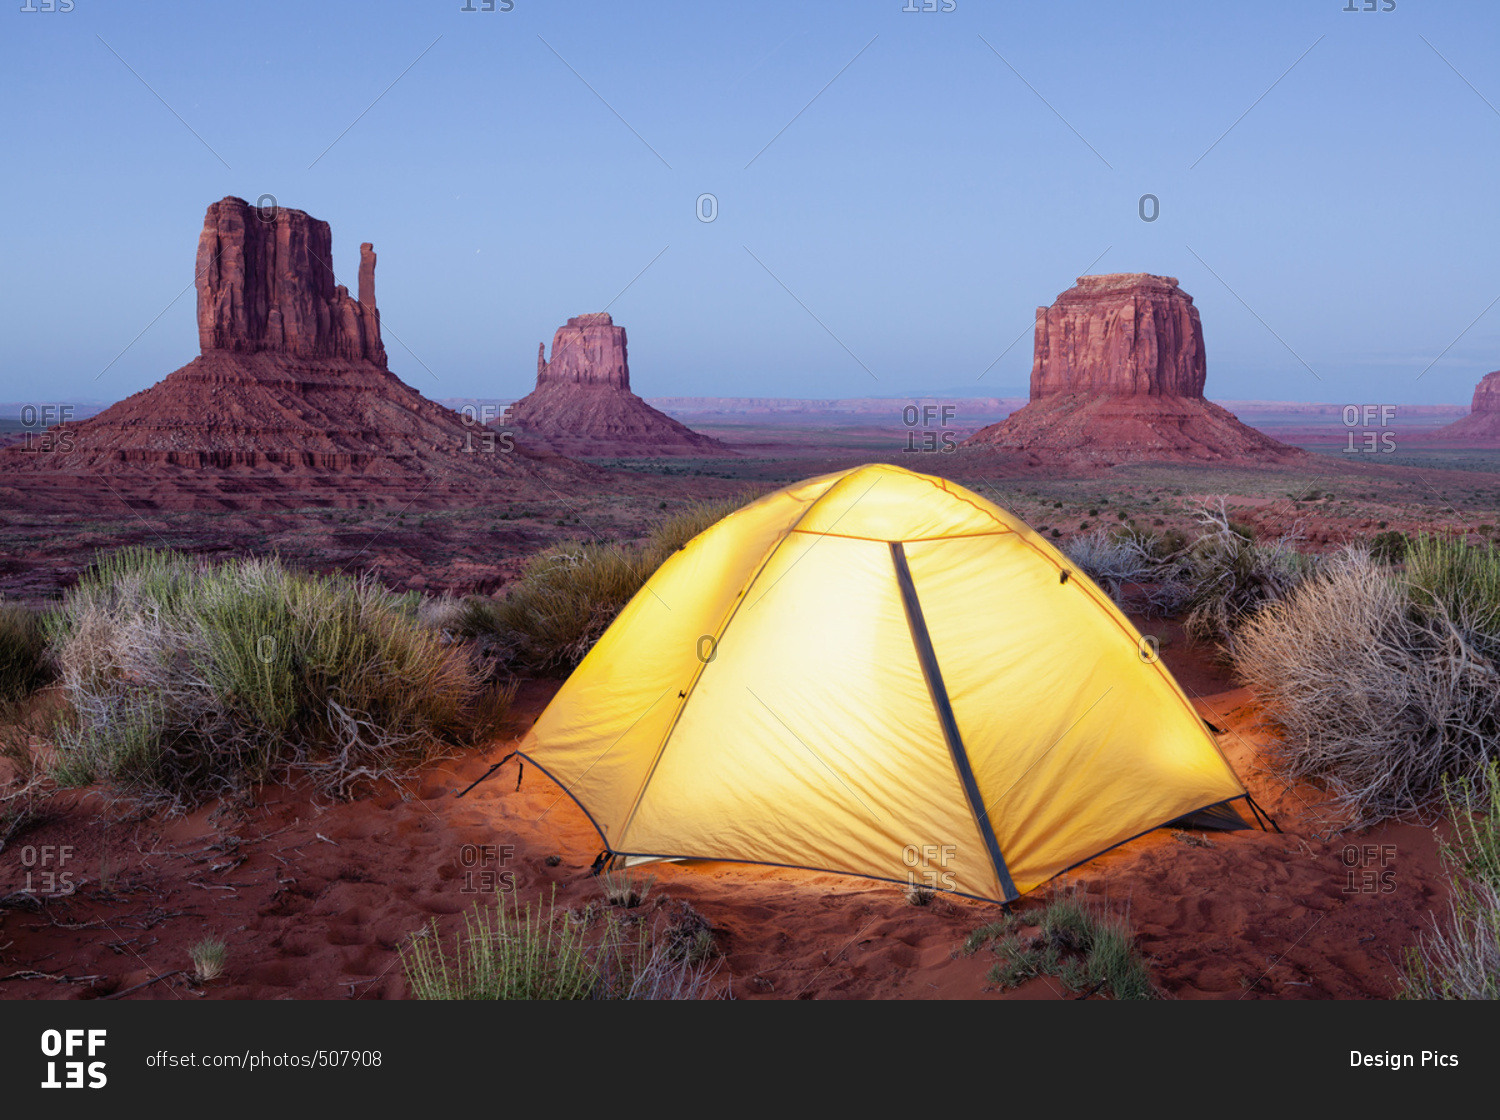 The Mittens and tent at dusk, Navajo Tribal Park, Monument Valley; Arizona, United States of America